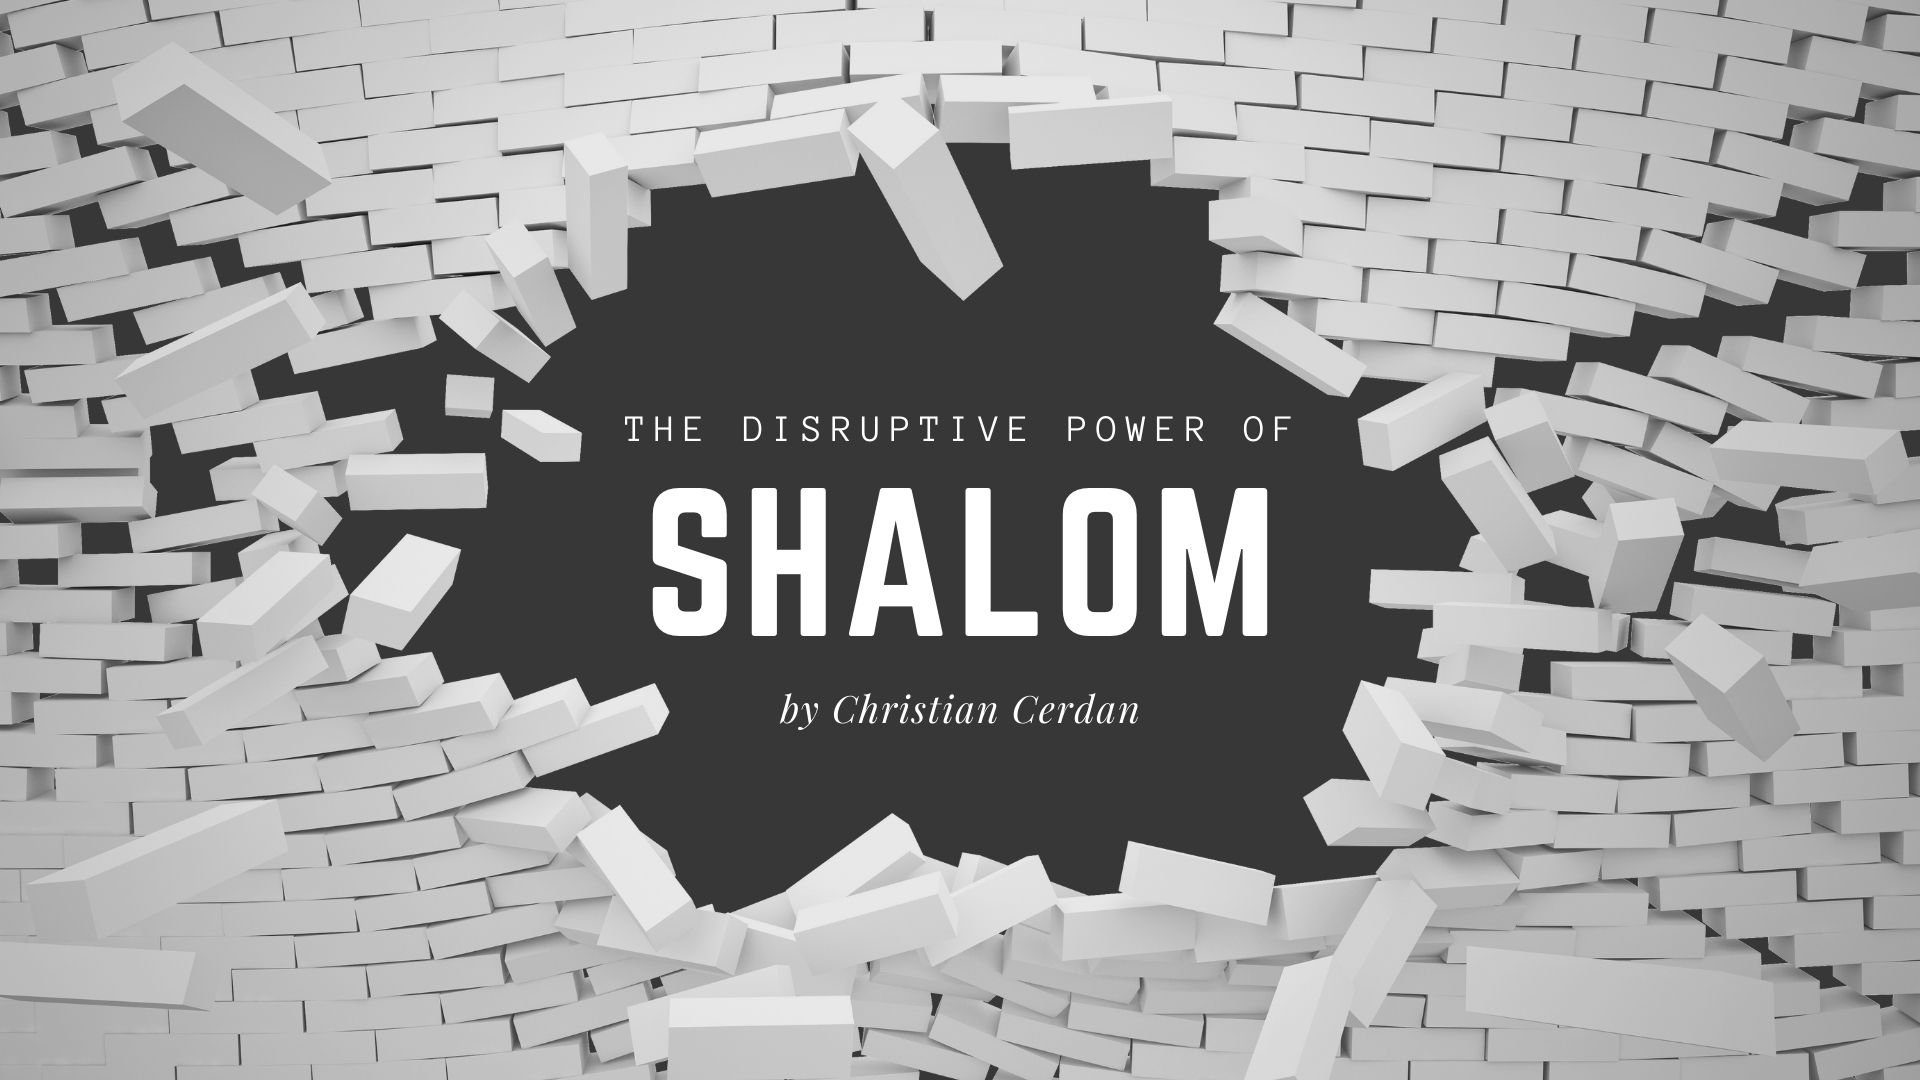 The Meaning of Shalom in the Bible, Shalom